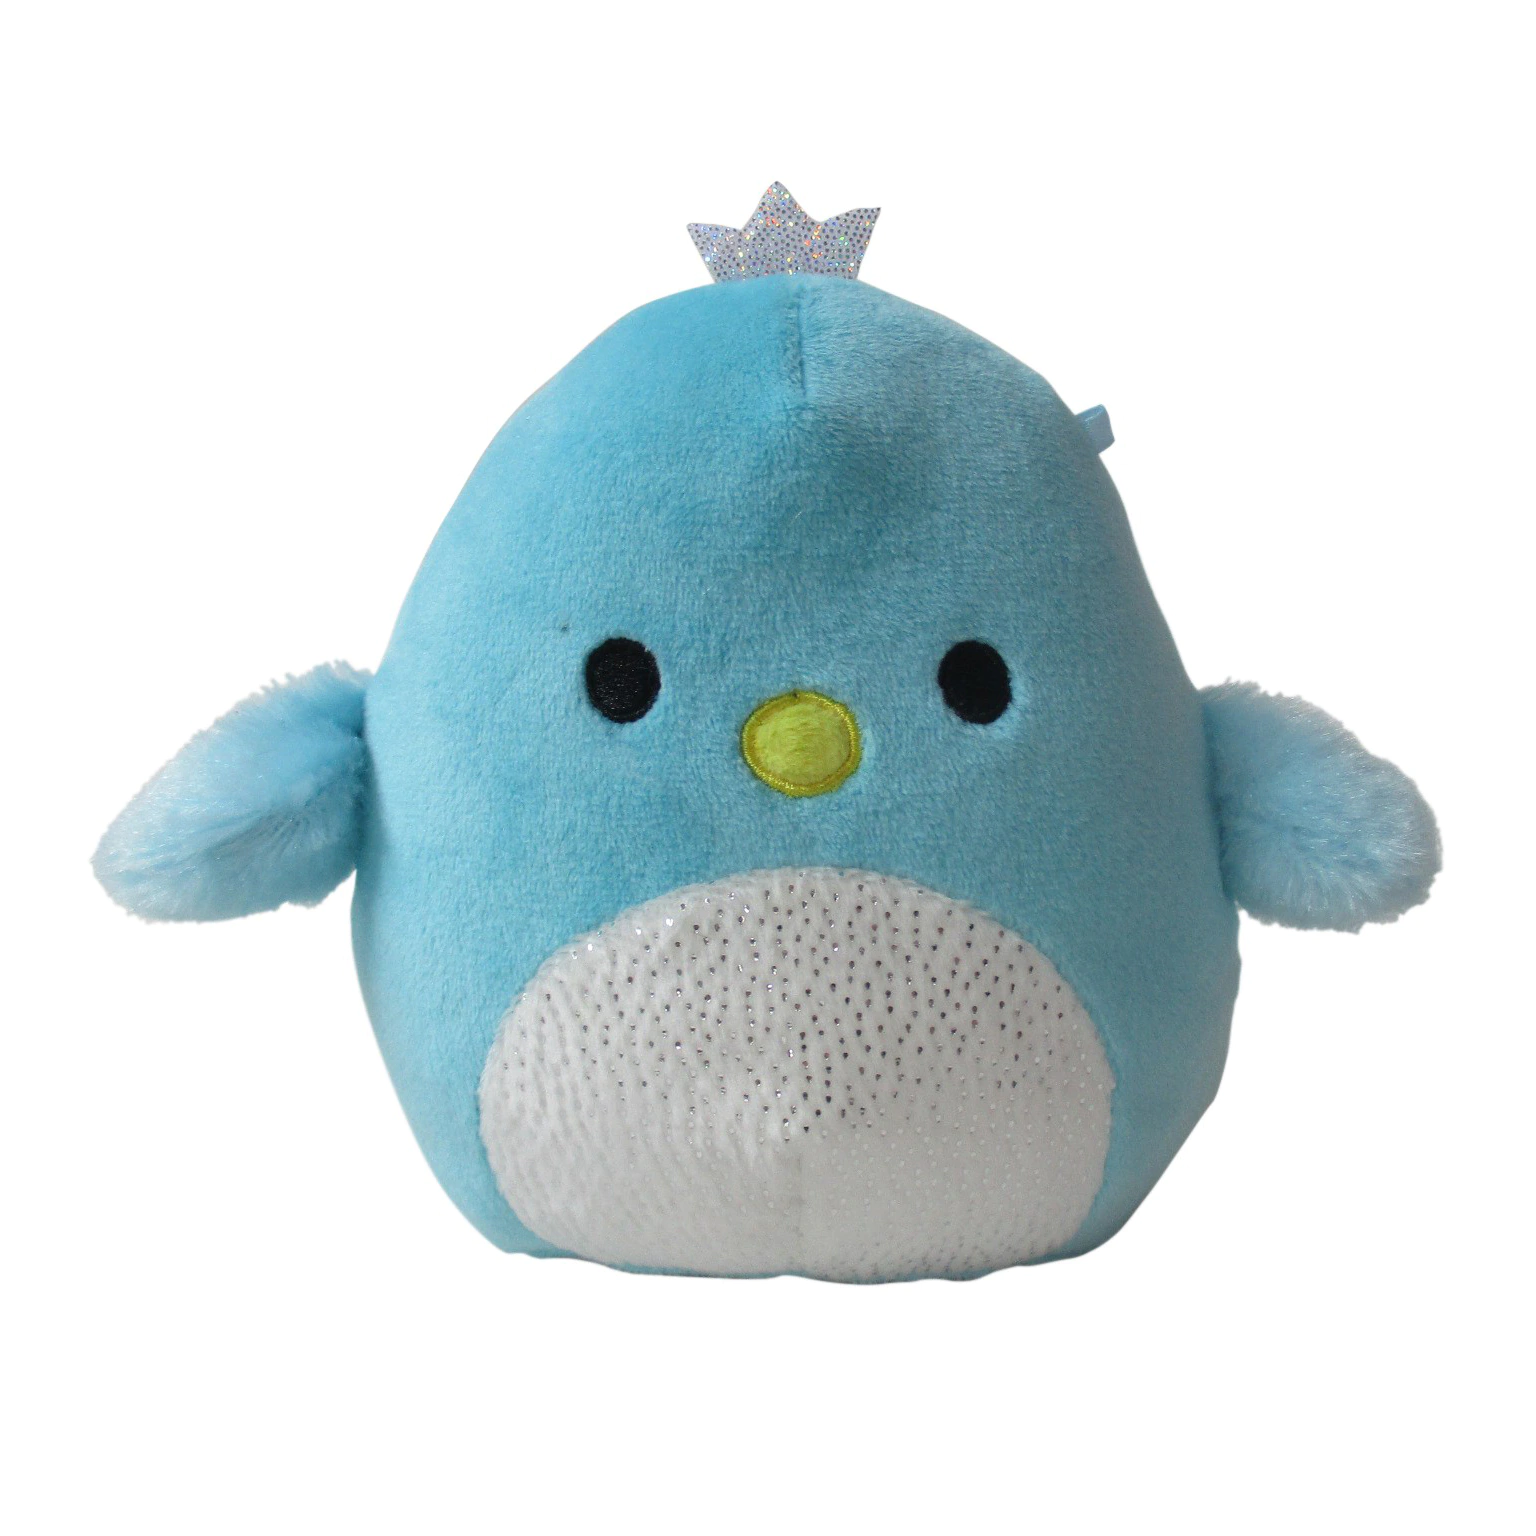 Details about   ☆New☆ 5” Squishmallows Cecilia the Bird Christmas Collection Super Plush 